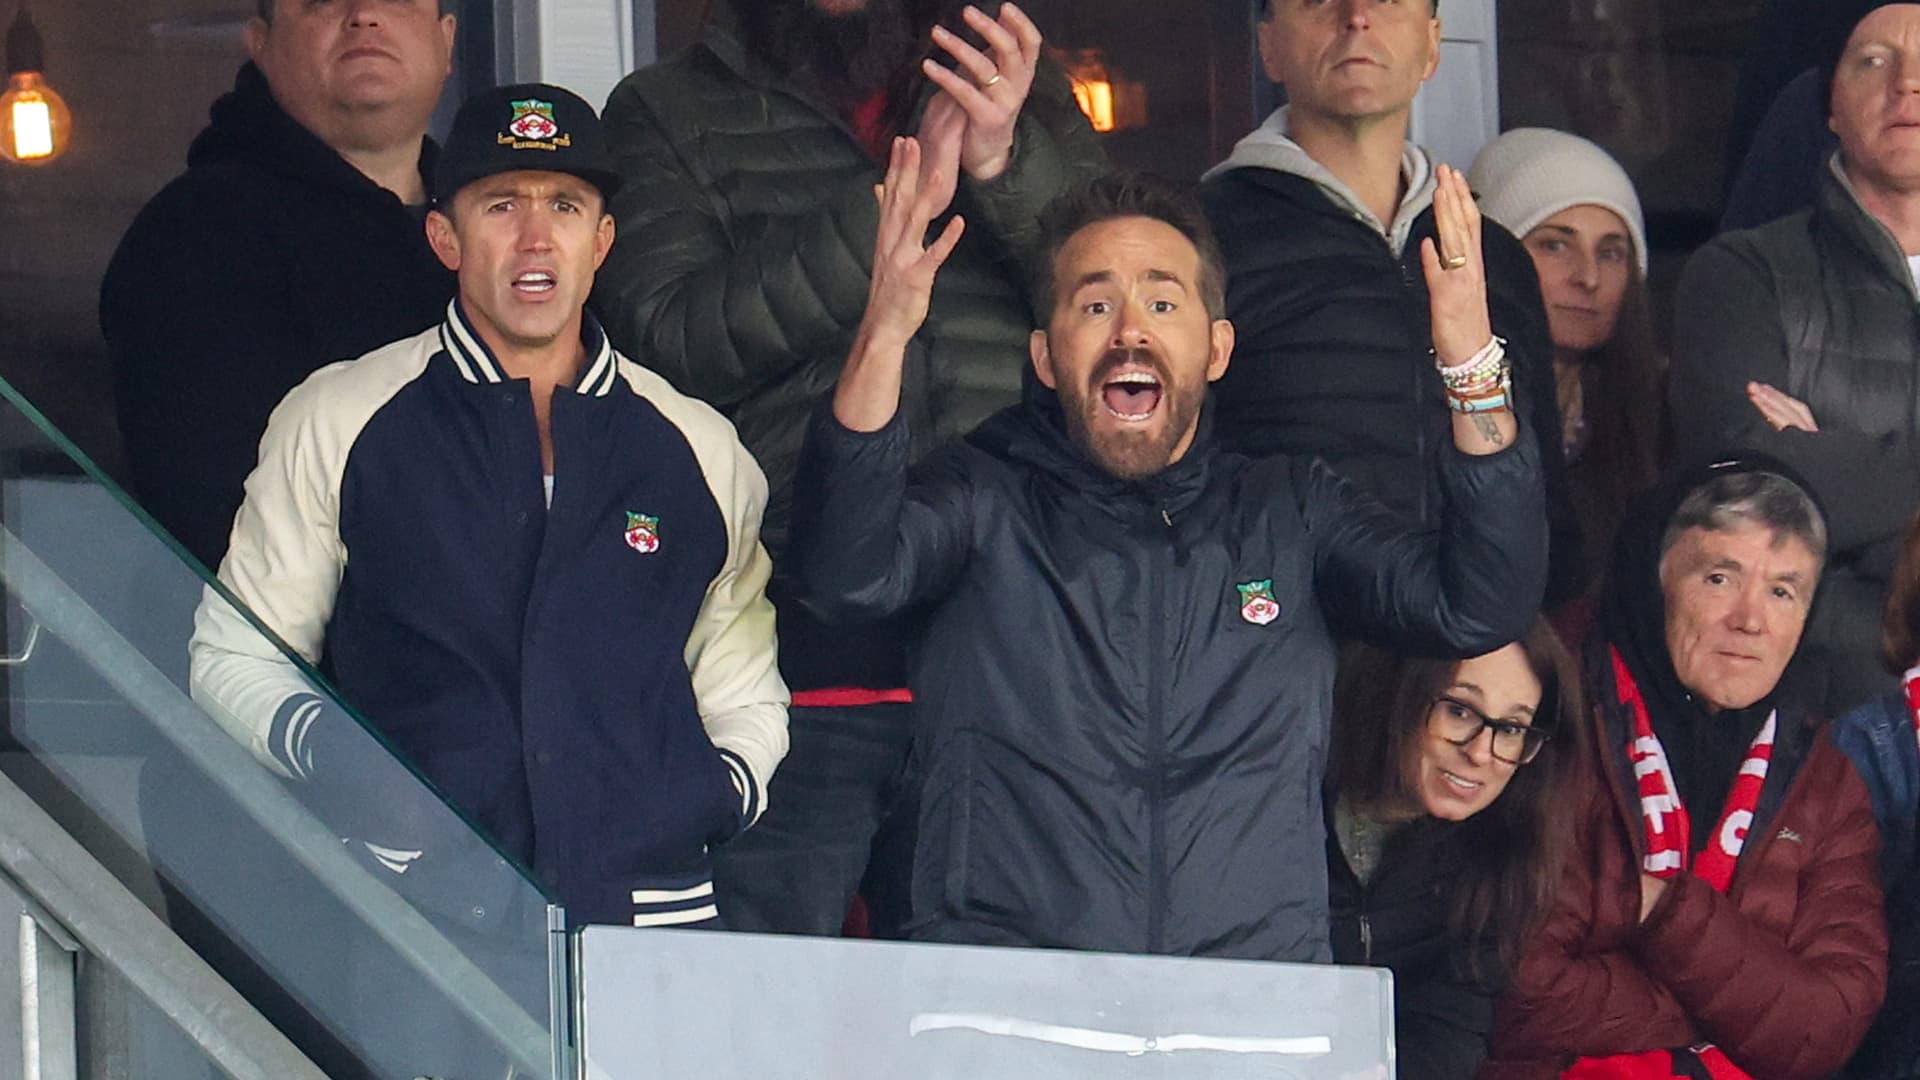 HP joins United Airlines in sponsoring Wrexham, the Welsh soccer club owned by Ryan Reynolds and Rob McElhenney